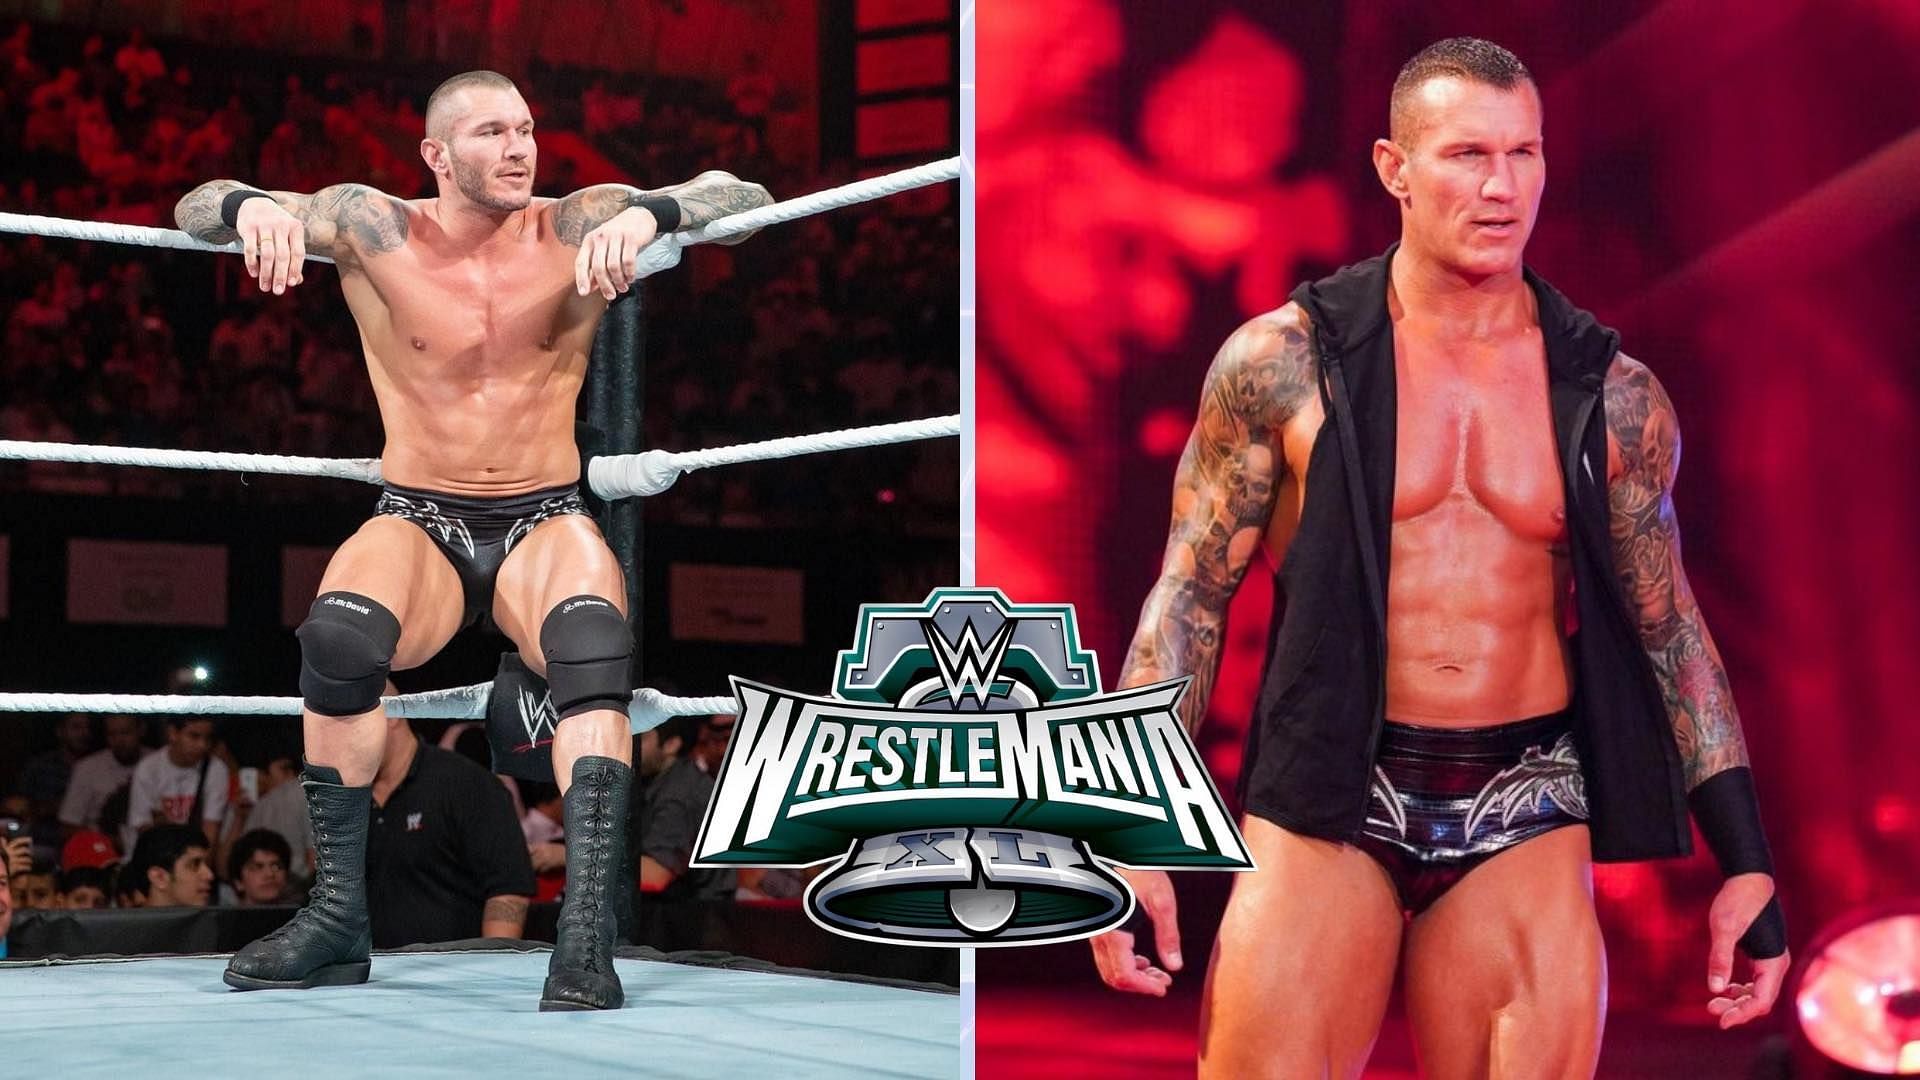 Randy Orton is a 14-time World Champion in WWE.